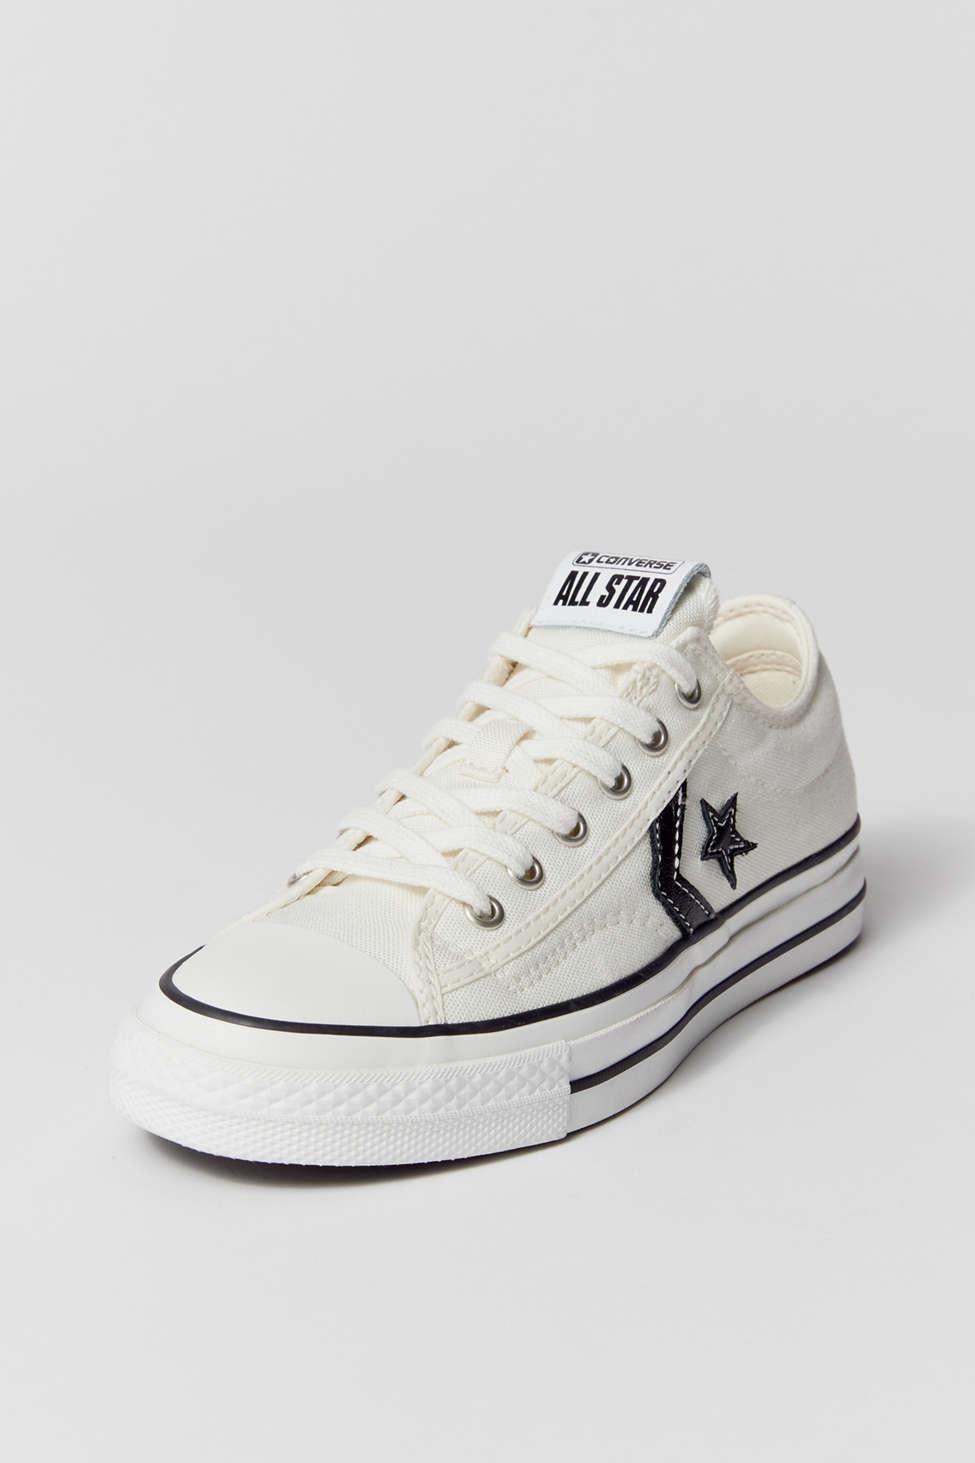 Converse Star Player 76 Sneaker In Vintage White/black,at Urban Outfitters  | Lyst